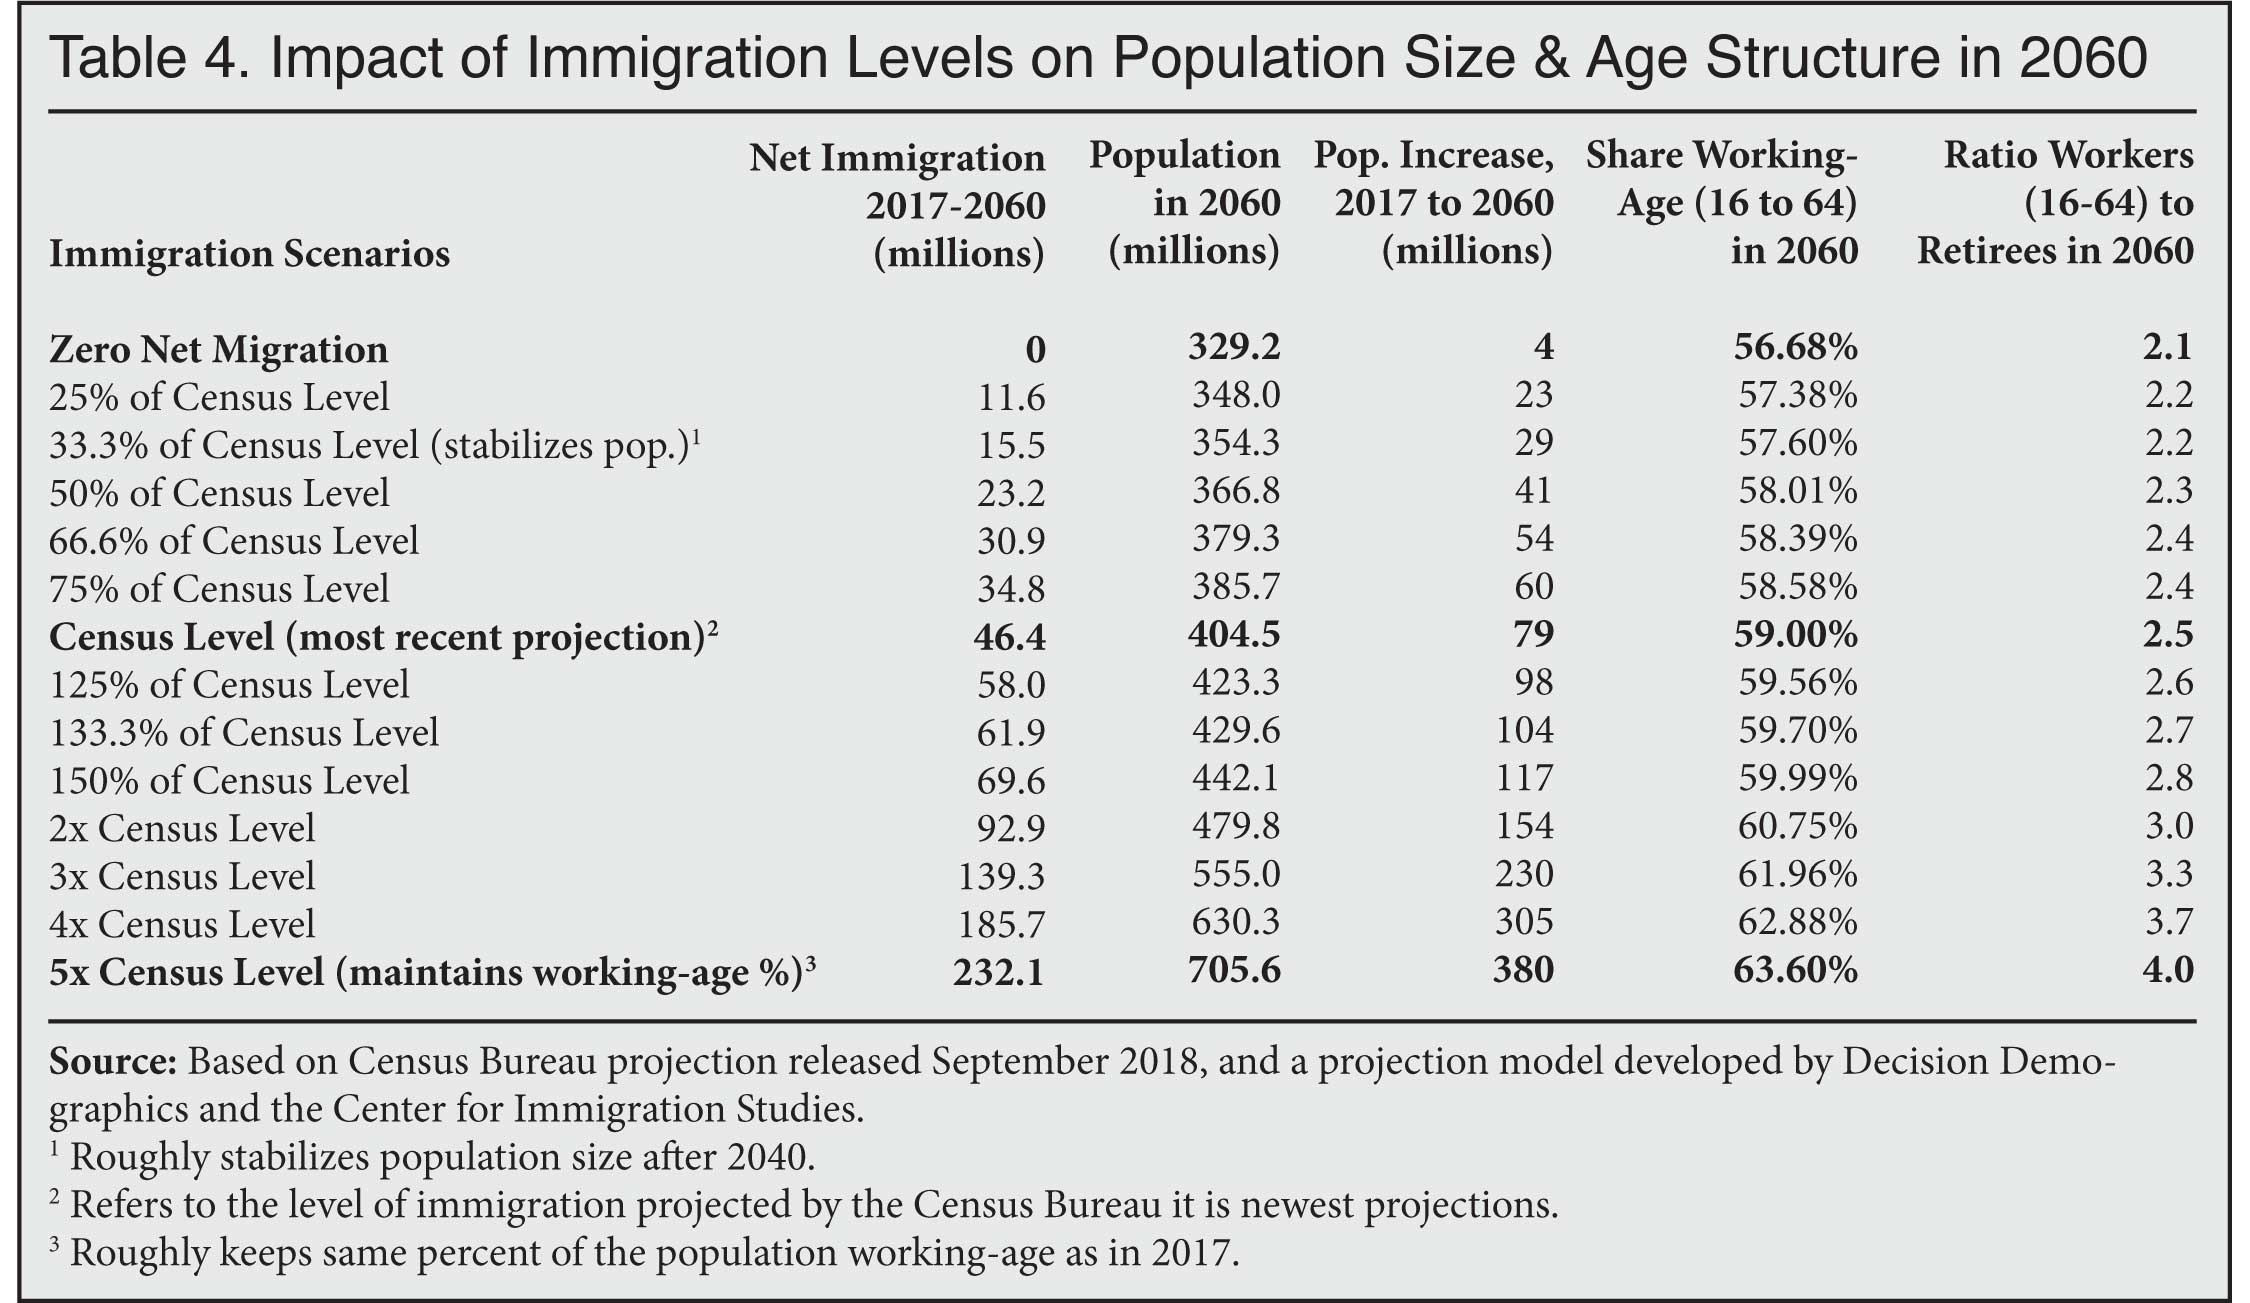 Table: Impact of Immigration Levels on Population Size and Age Structure in 2060